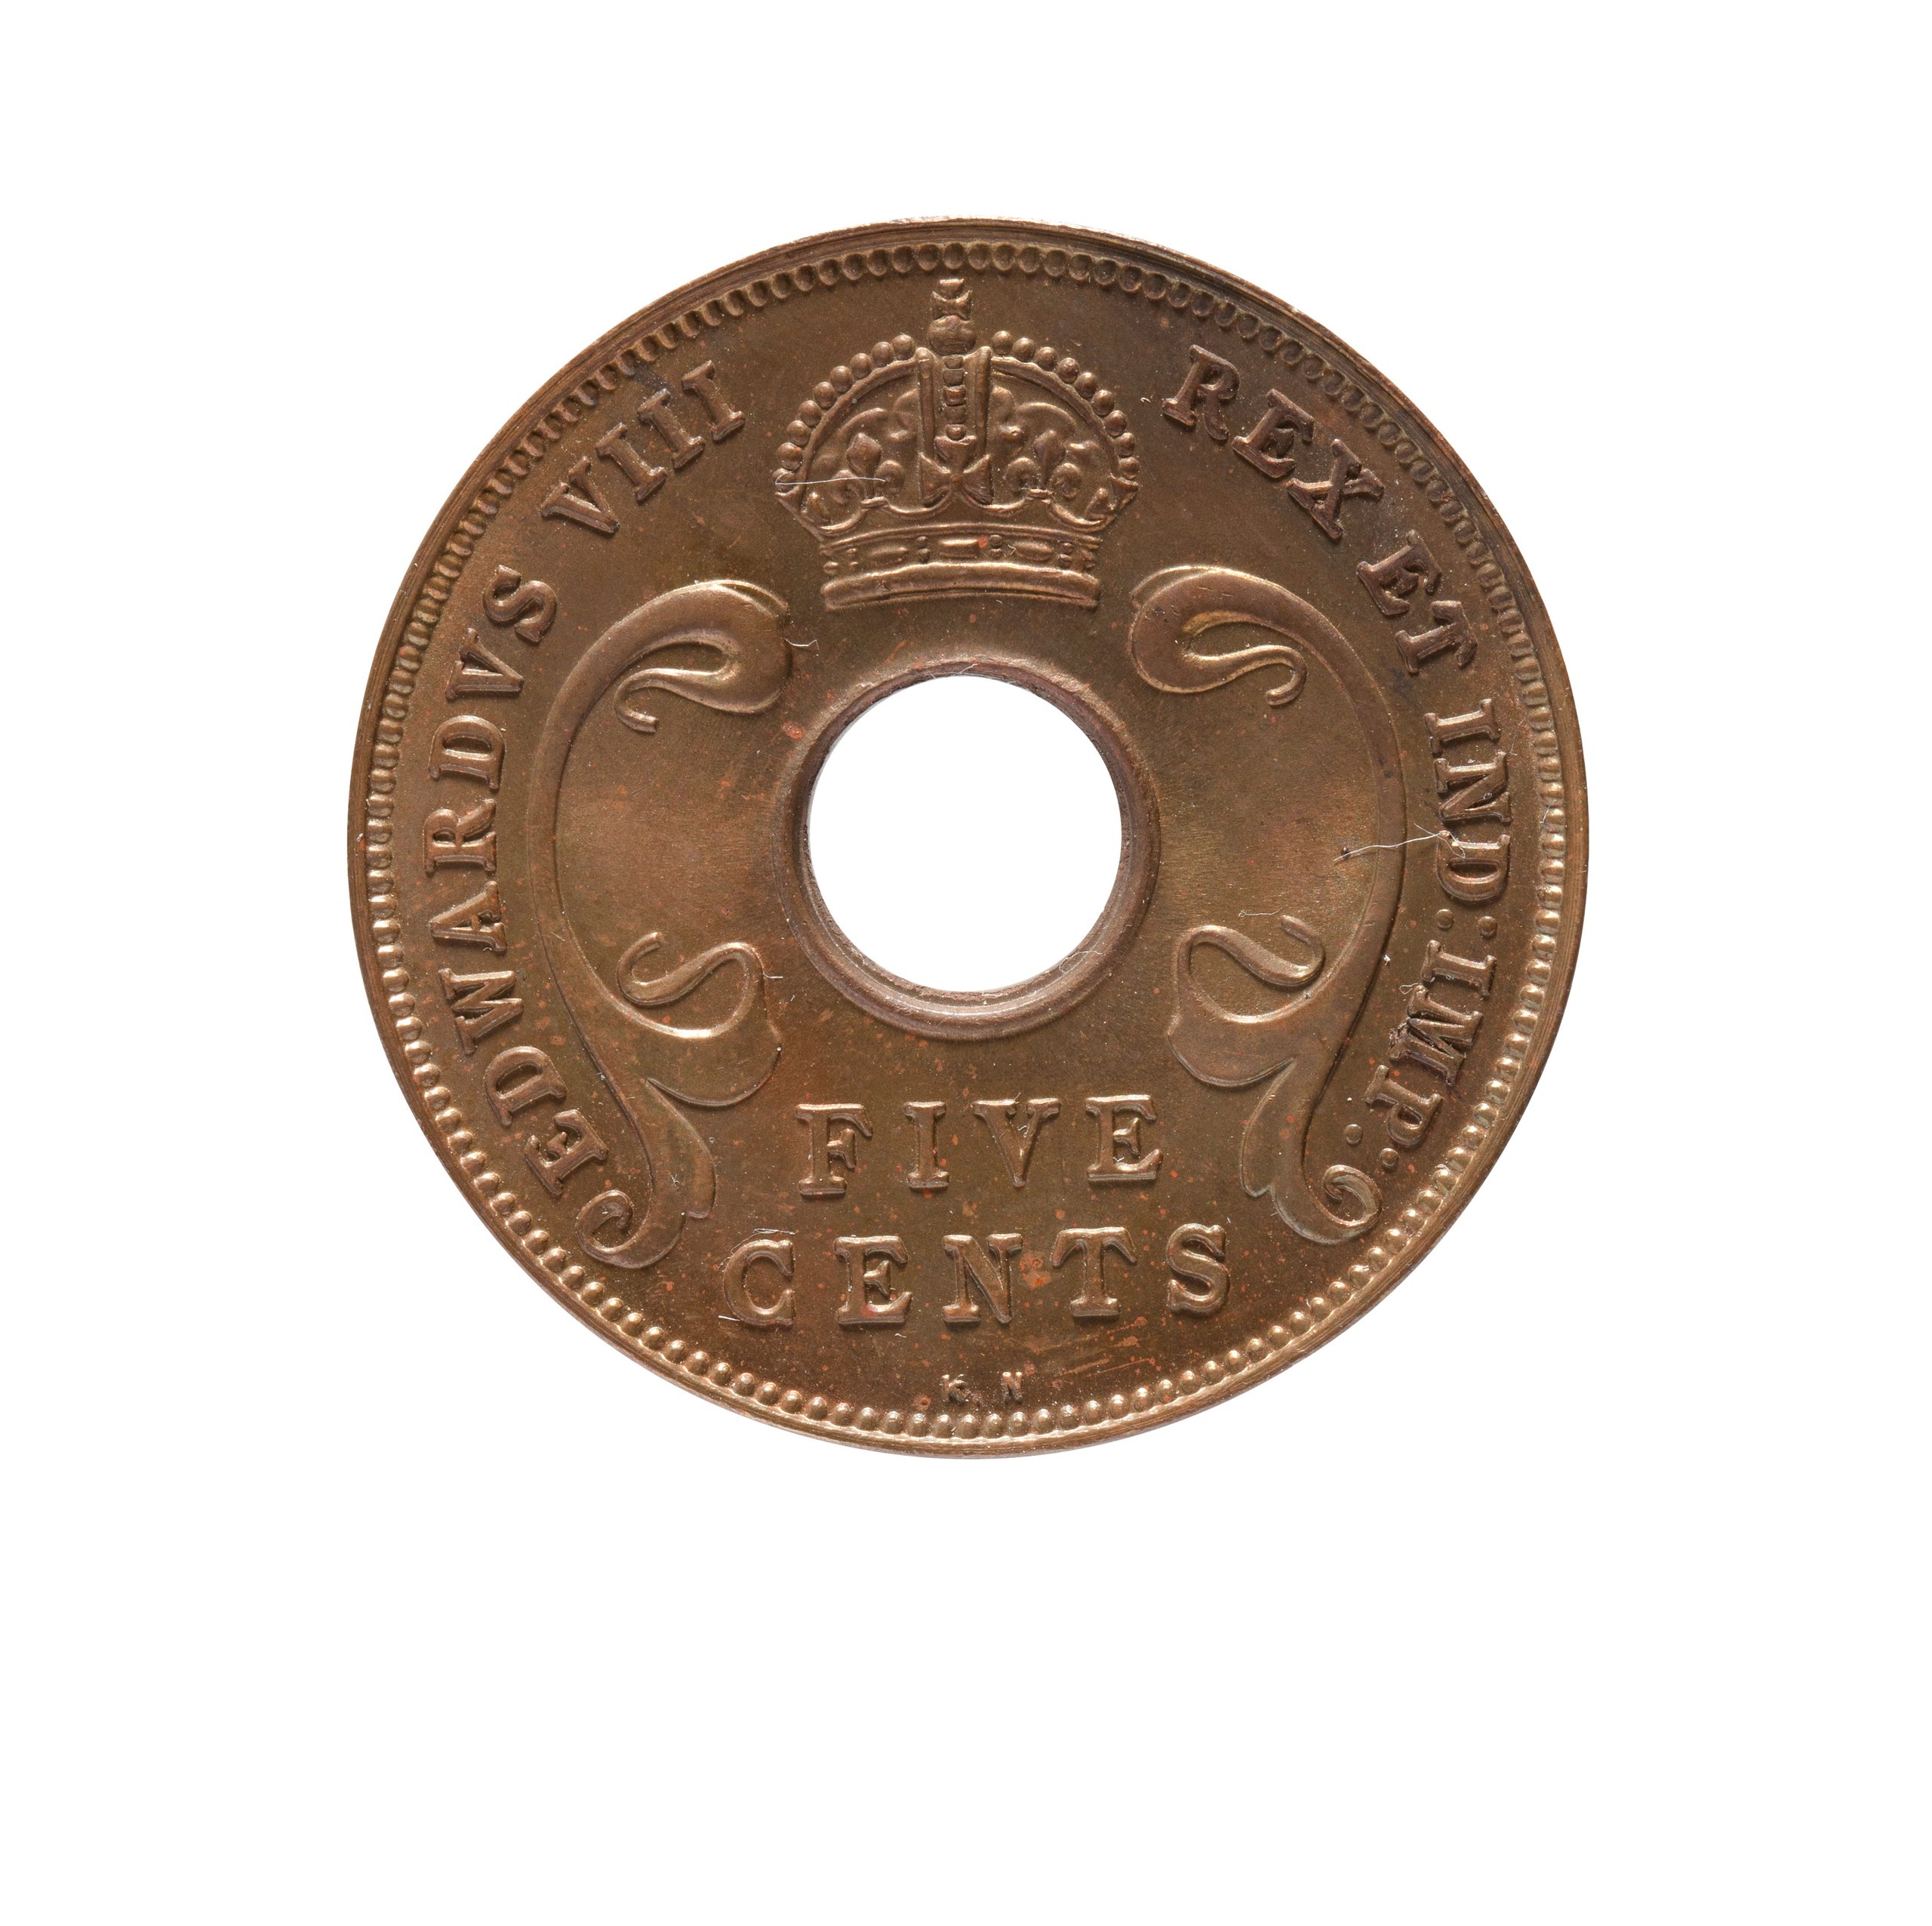 Five cent coin from British West Africa, 1936